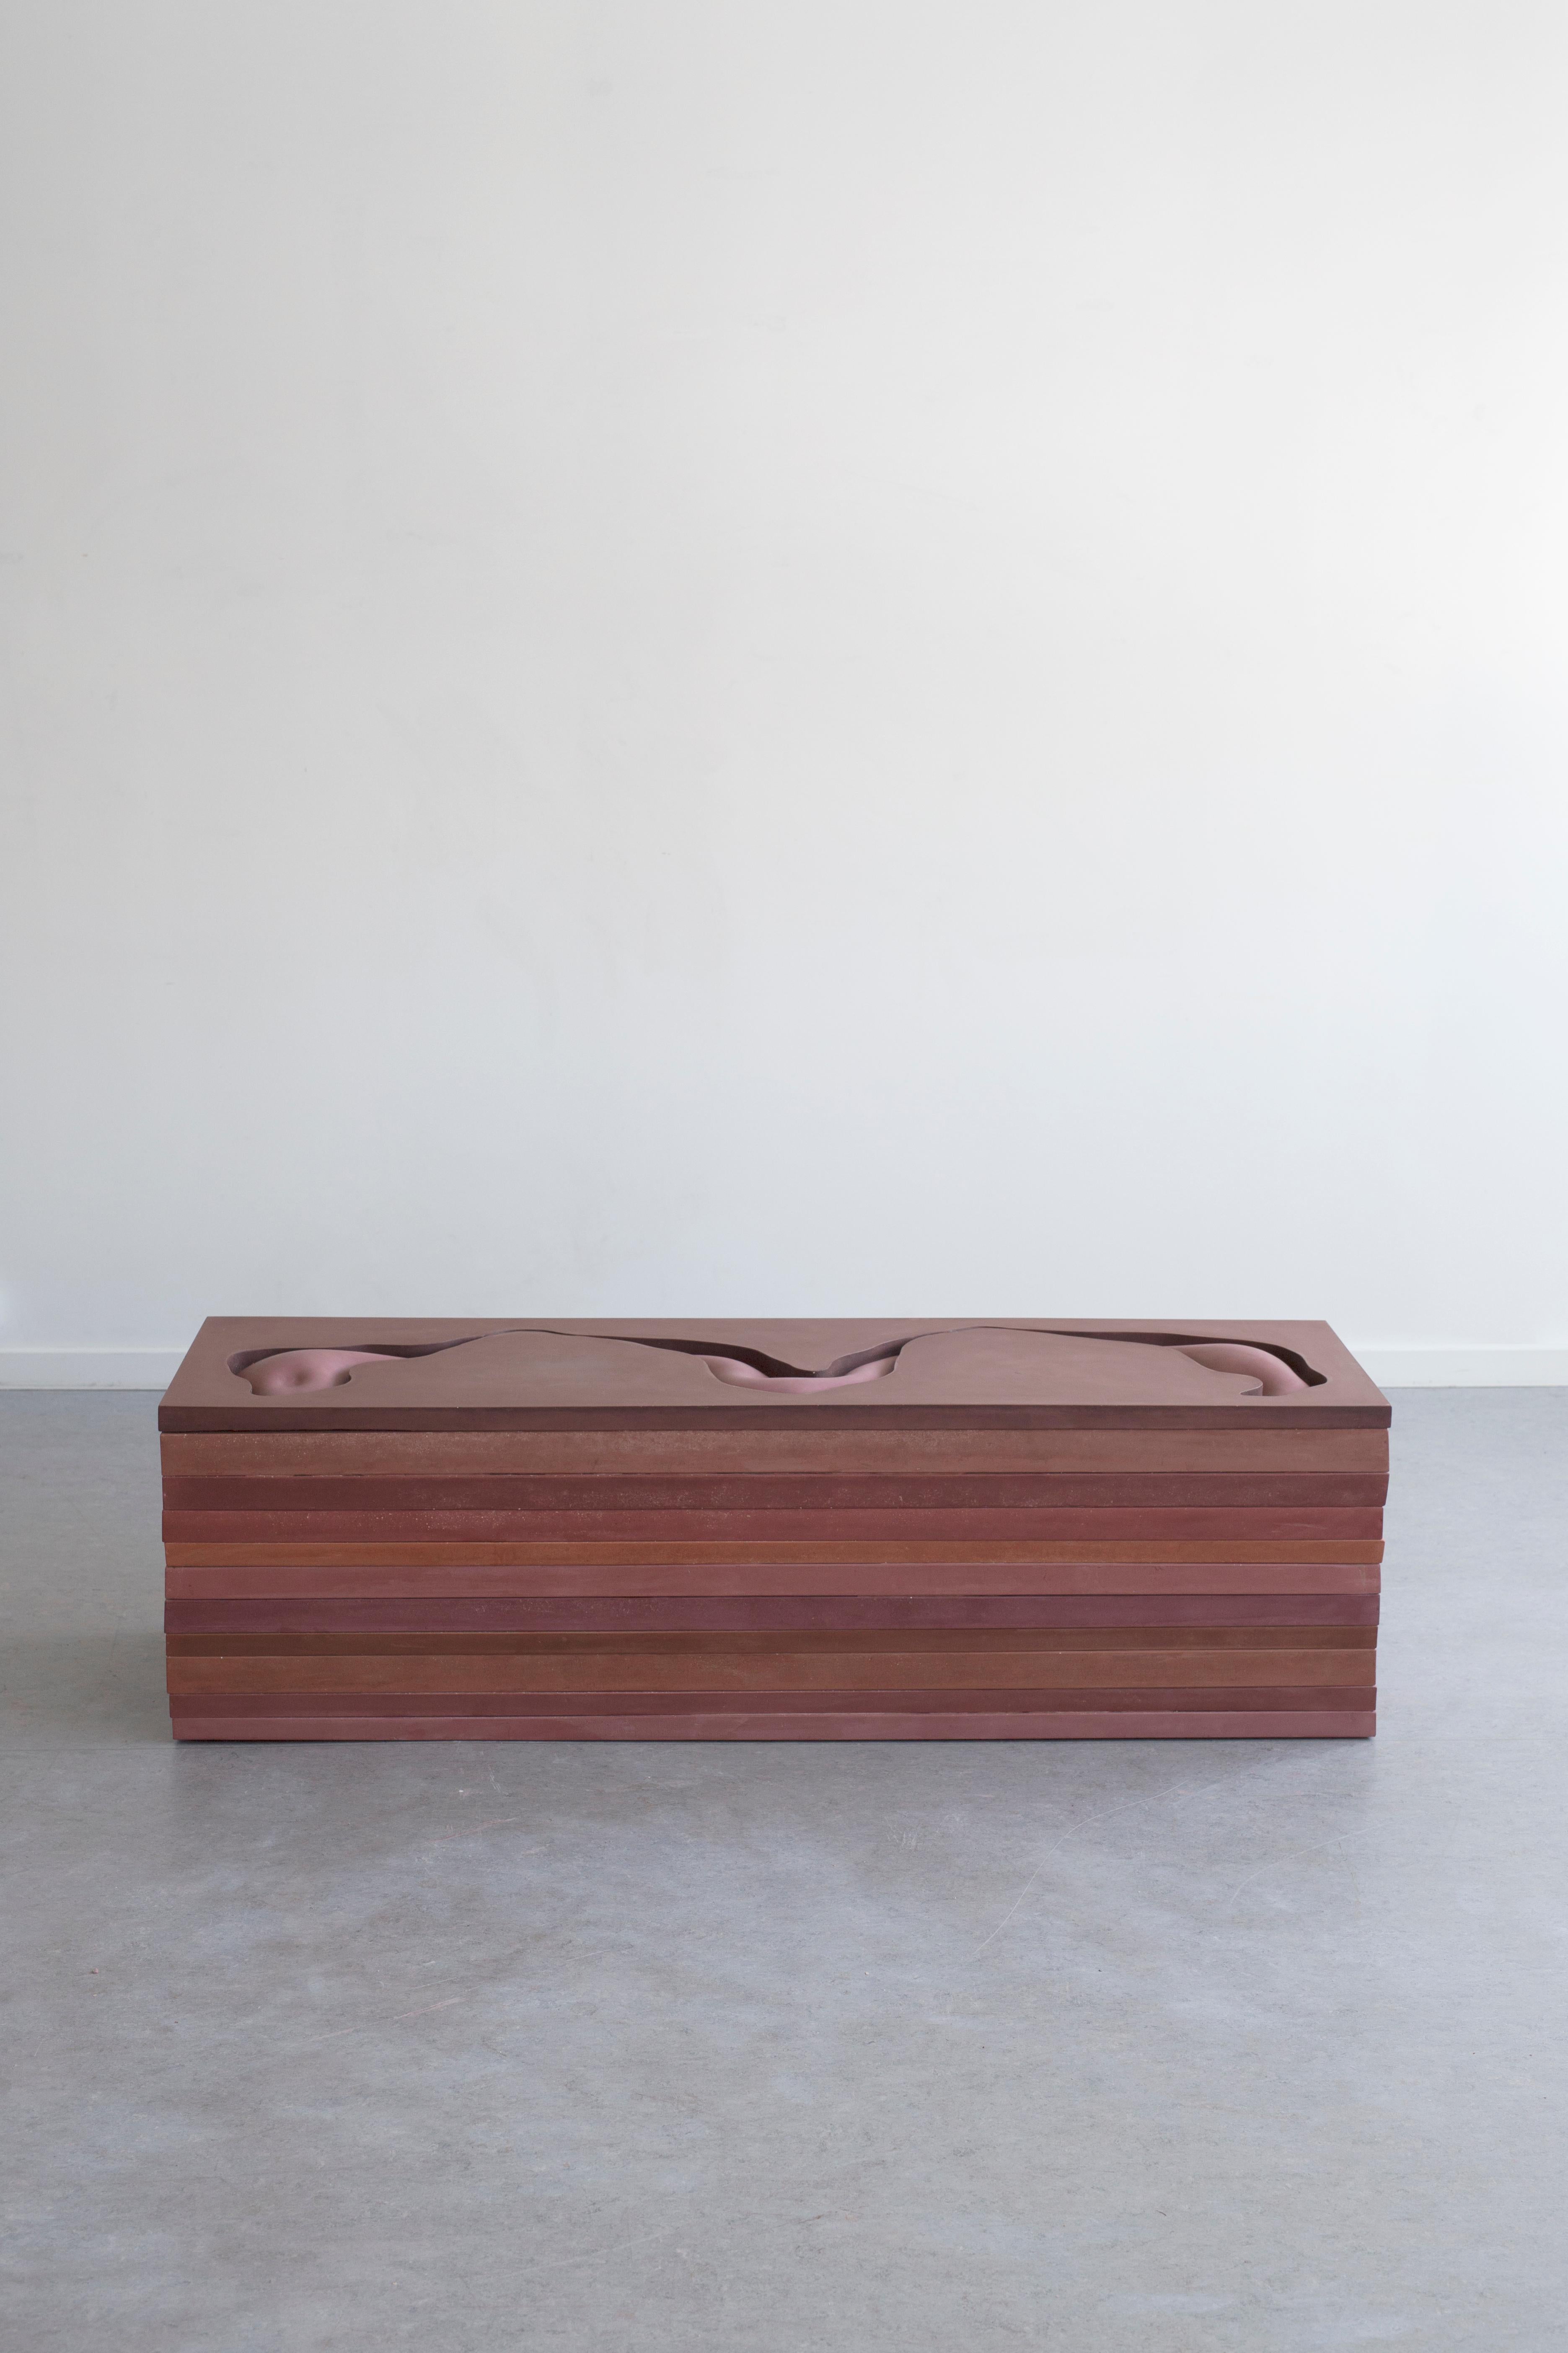 Unique and handmade jesmonite bench by Swedish artist Hilda Hellström. One out of a series of two. Part of the exhibition The Science of Imaginary Solutions, August - September 2019.

About Hilda Hellström:
Hellström's (b. 1984 Gothenburg,